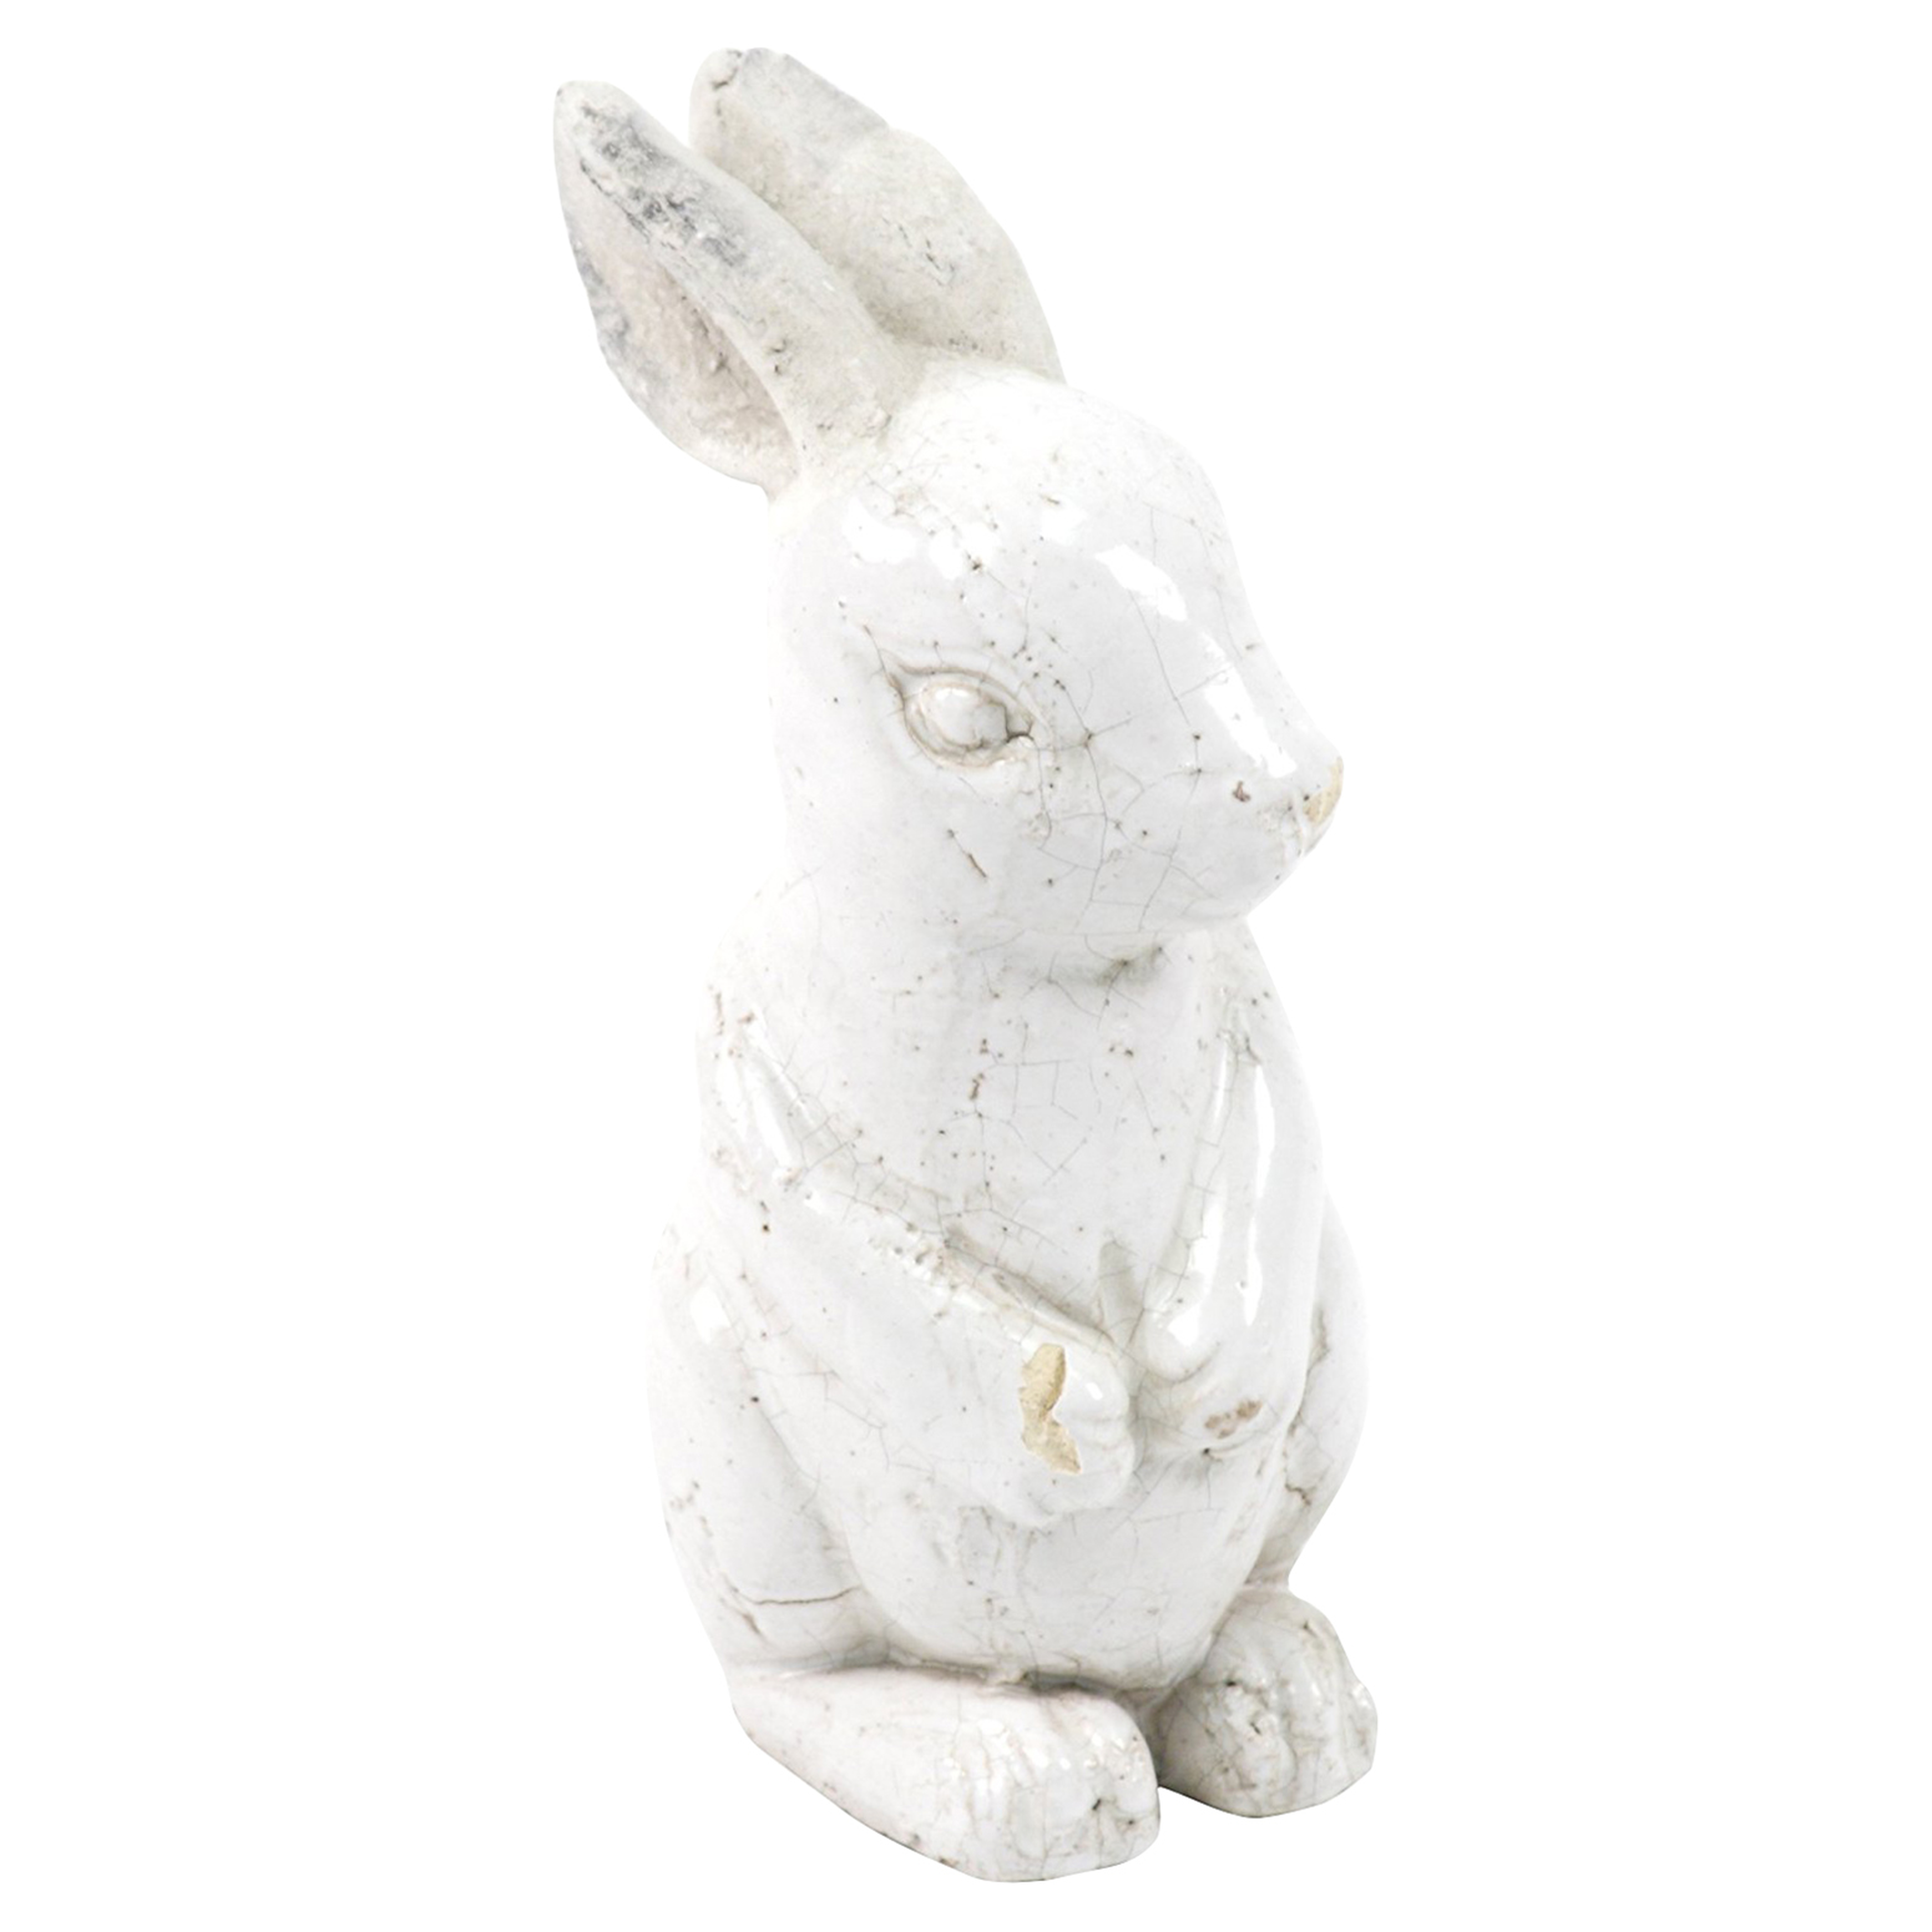 Herby Modern Classic Decorative White Stoneware Pottery Rabbit - Small - Kathy Kuo Home